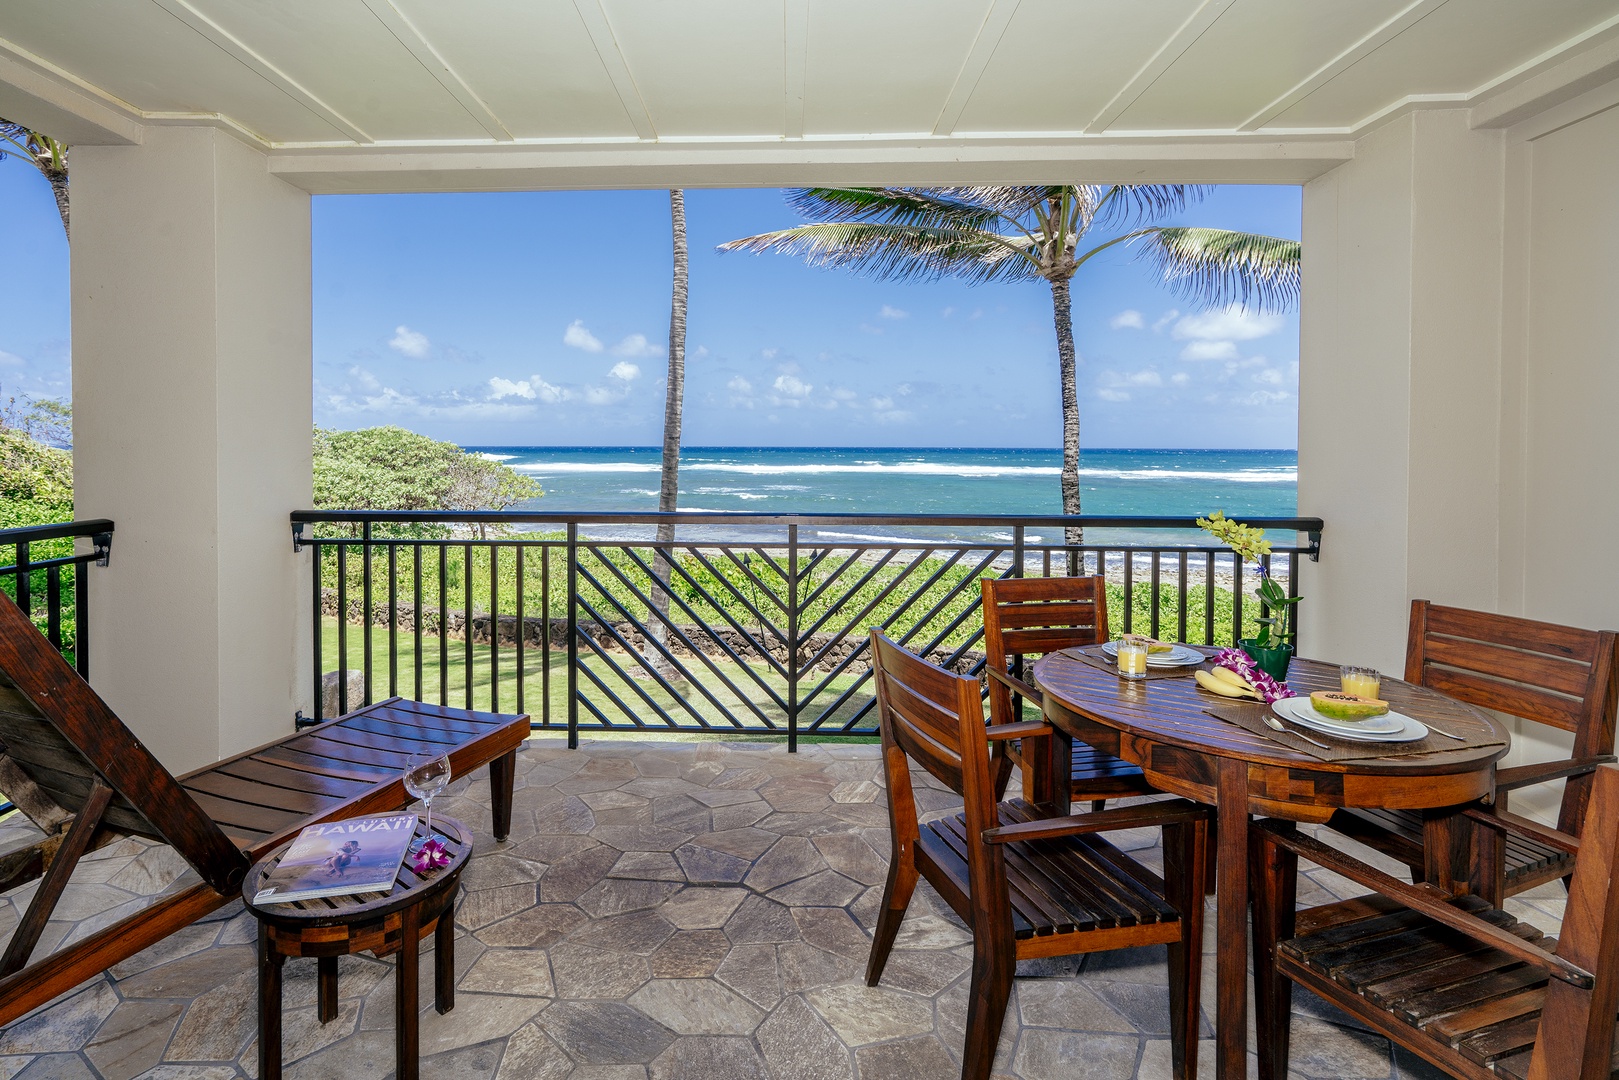 Kahuku Vacation Rentals, OFB Turtle Bay Villas 216 - This calls for relaxation and peace!